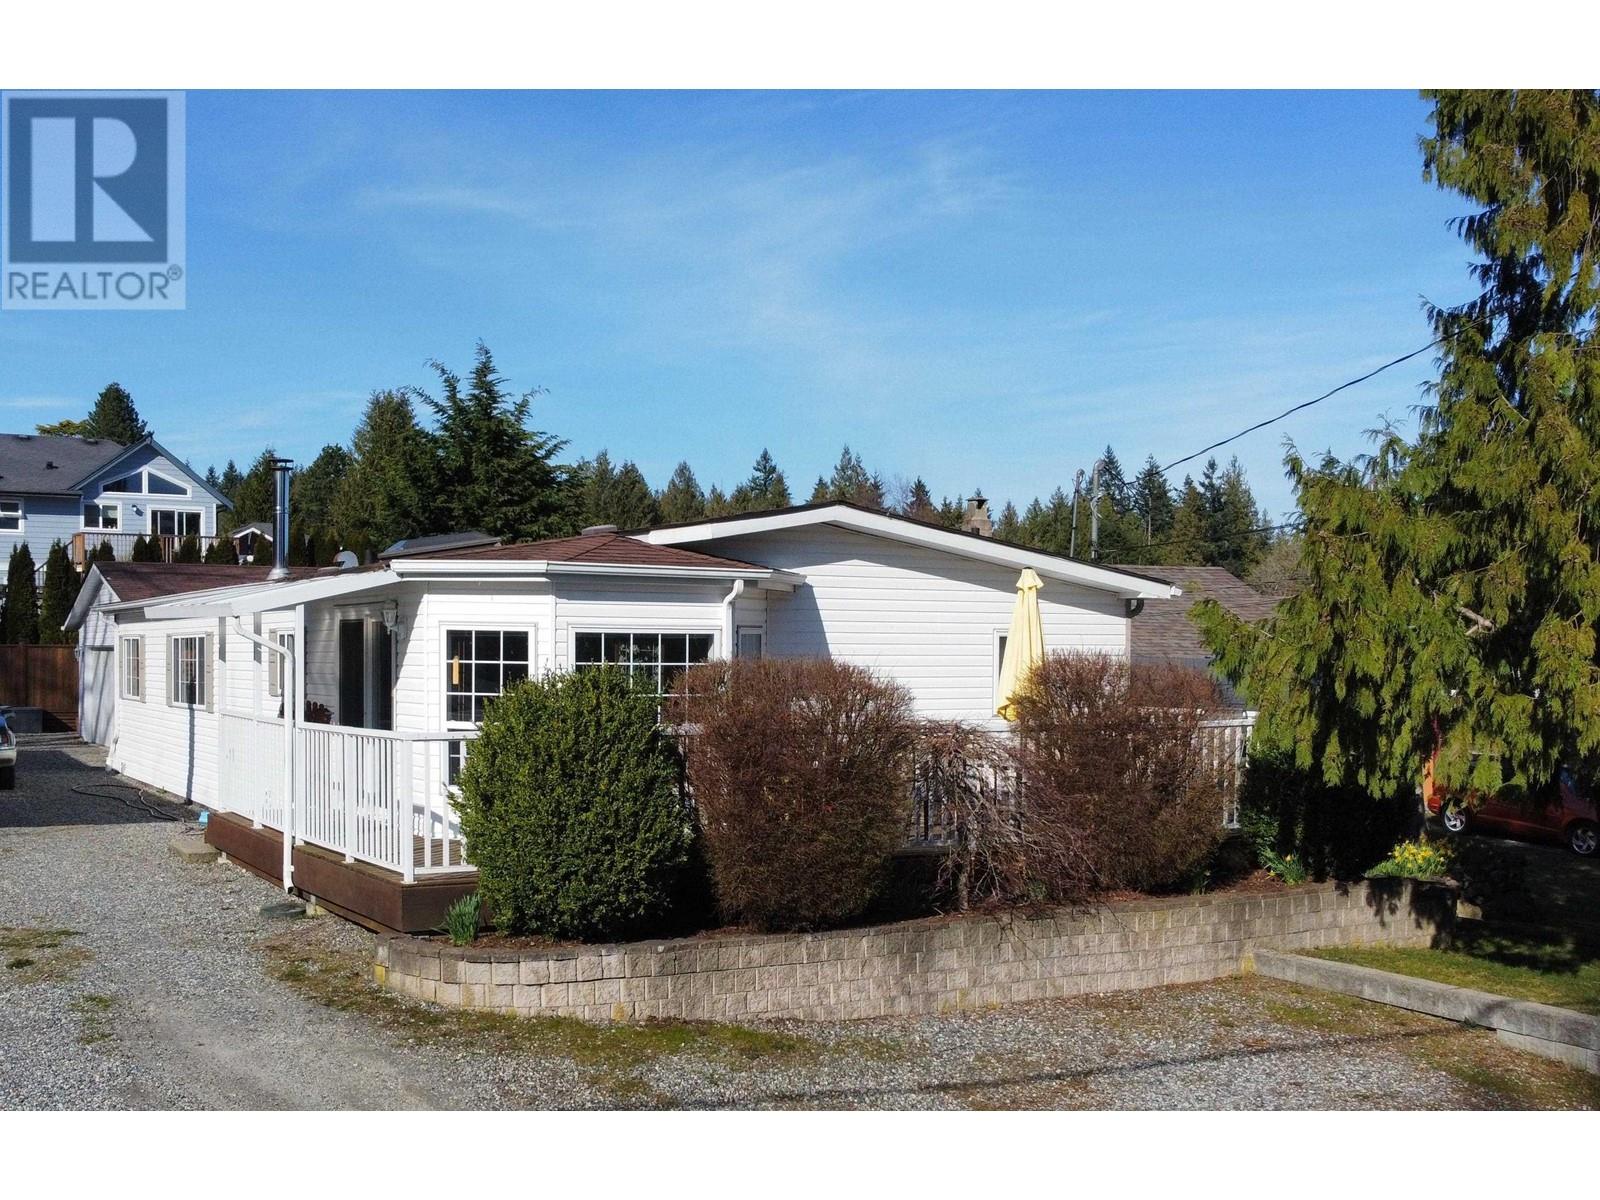 760 HILLCREST ROAD, gibsons, British Columbia